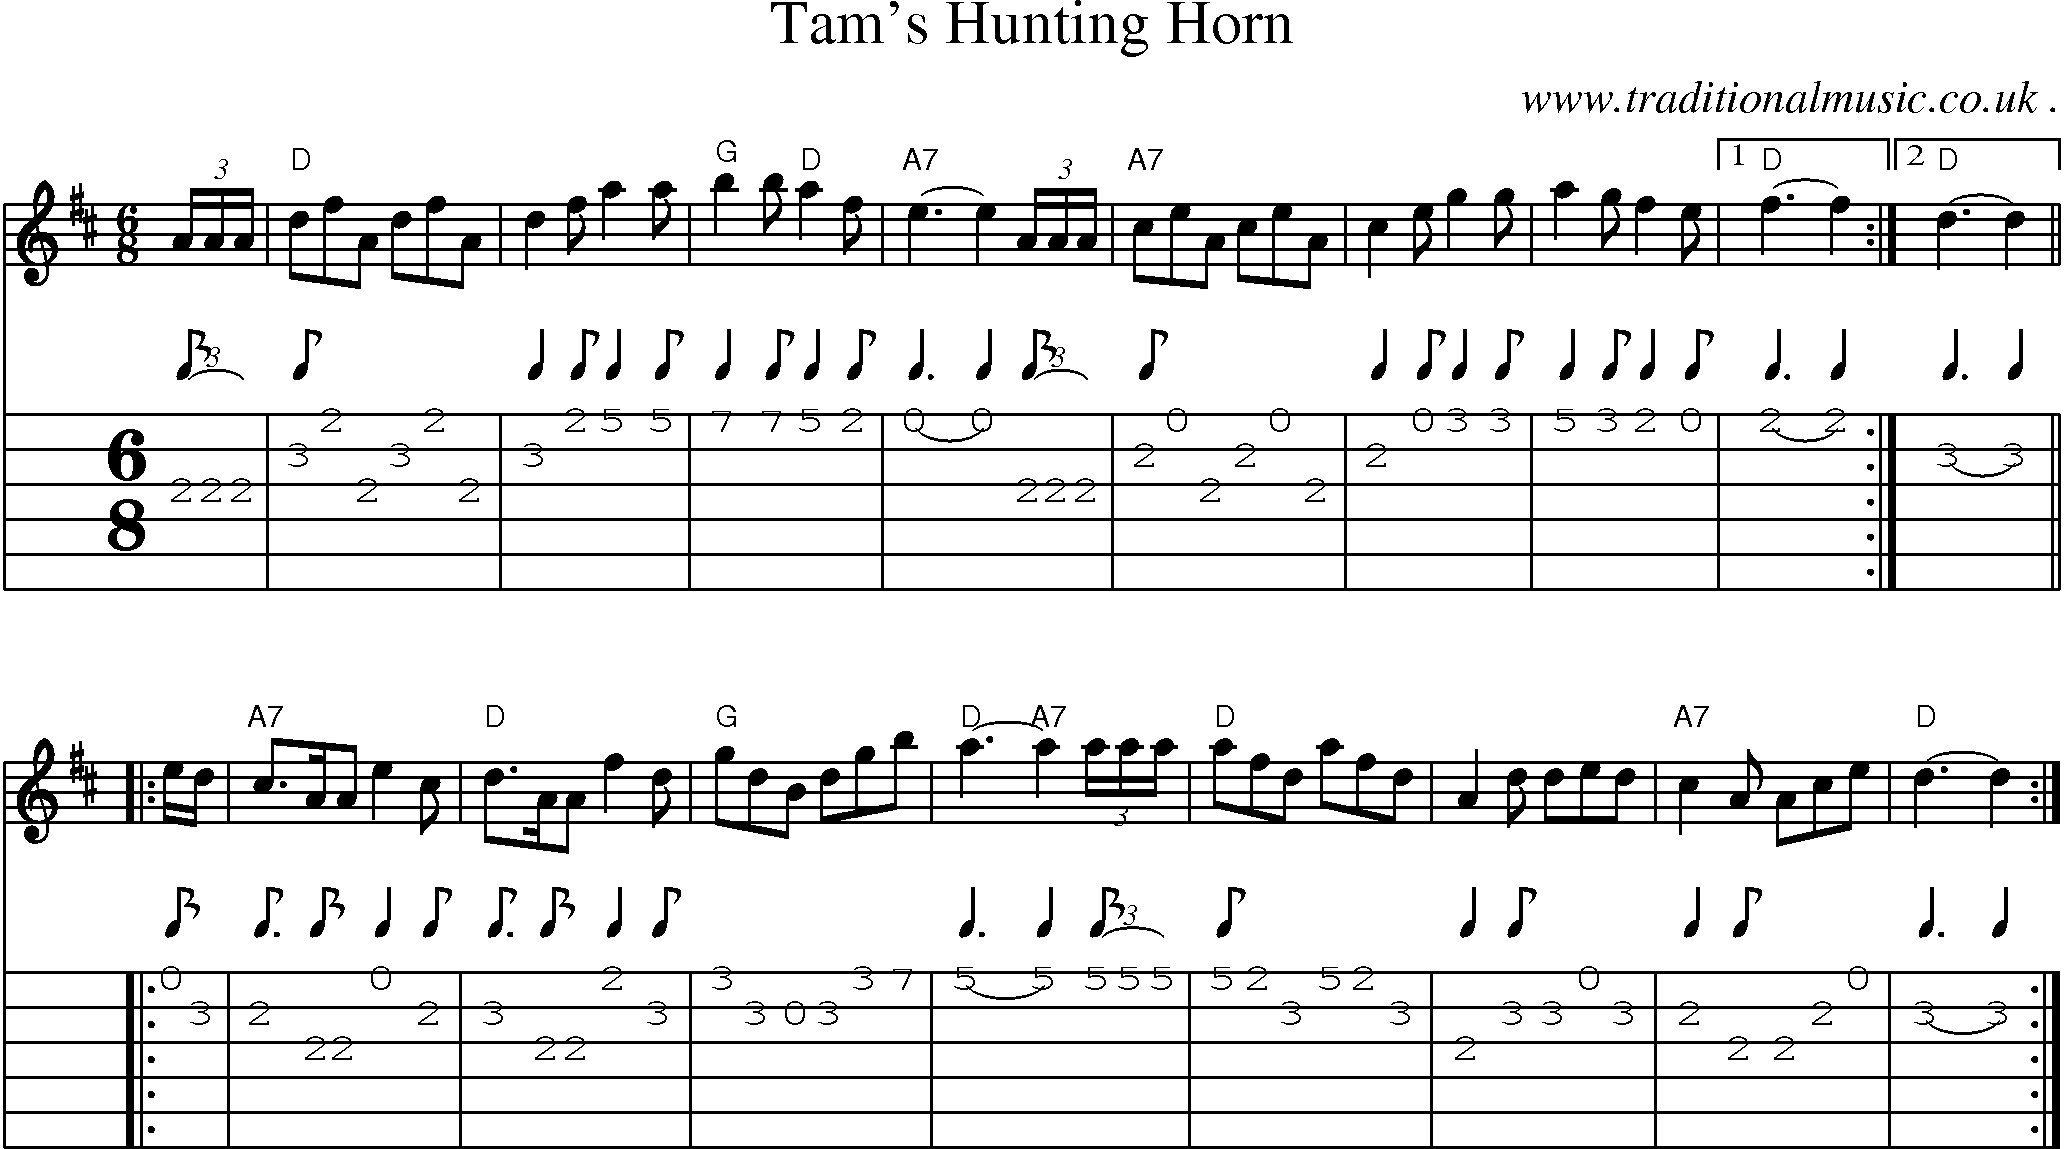 Sheet-music  score, Chords and Guitar Tabs for Tams Hunting Horn